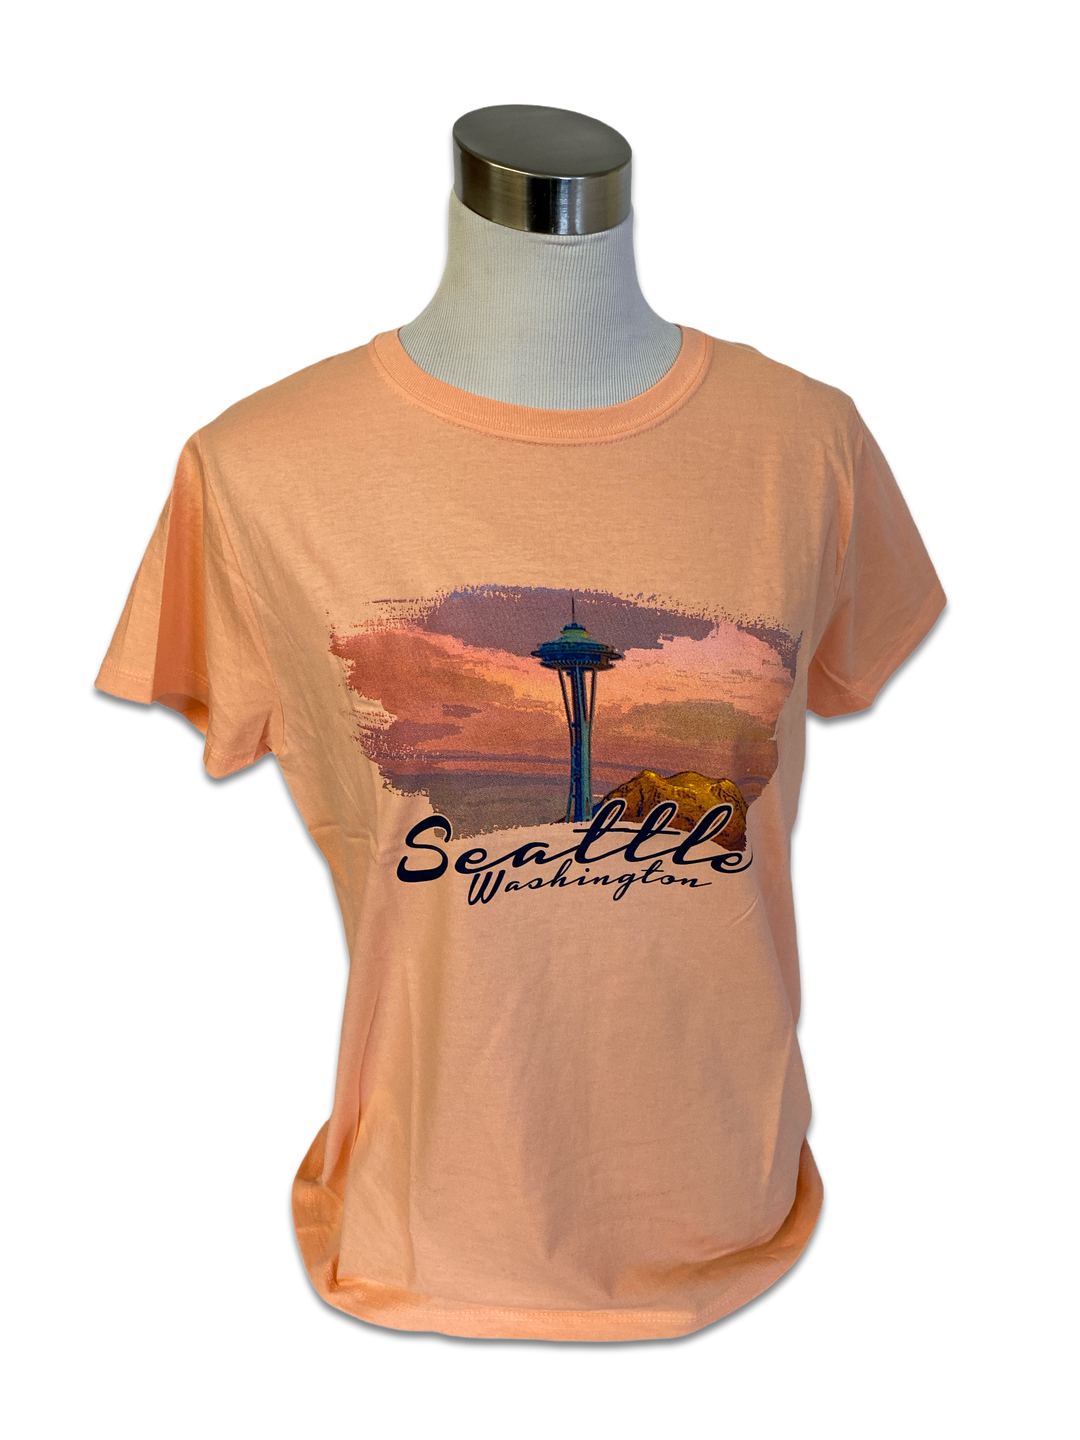 Seattle Lay of the Land Tee